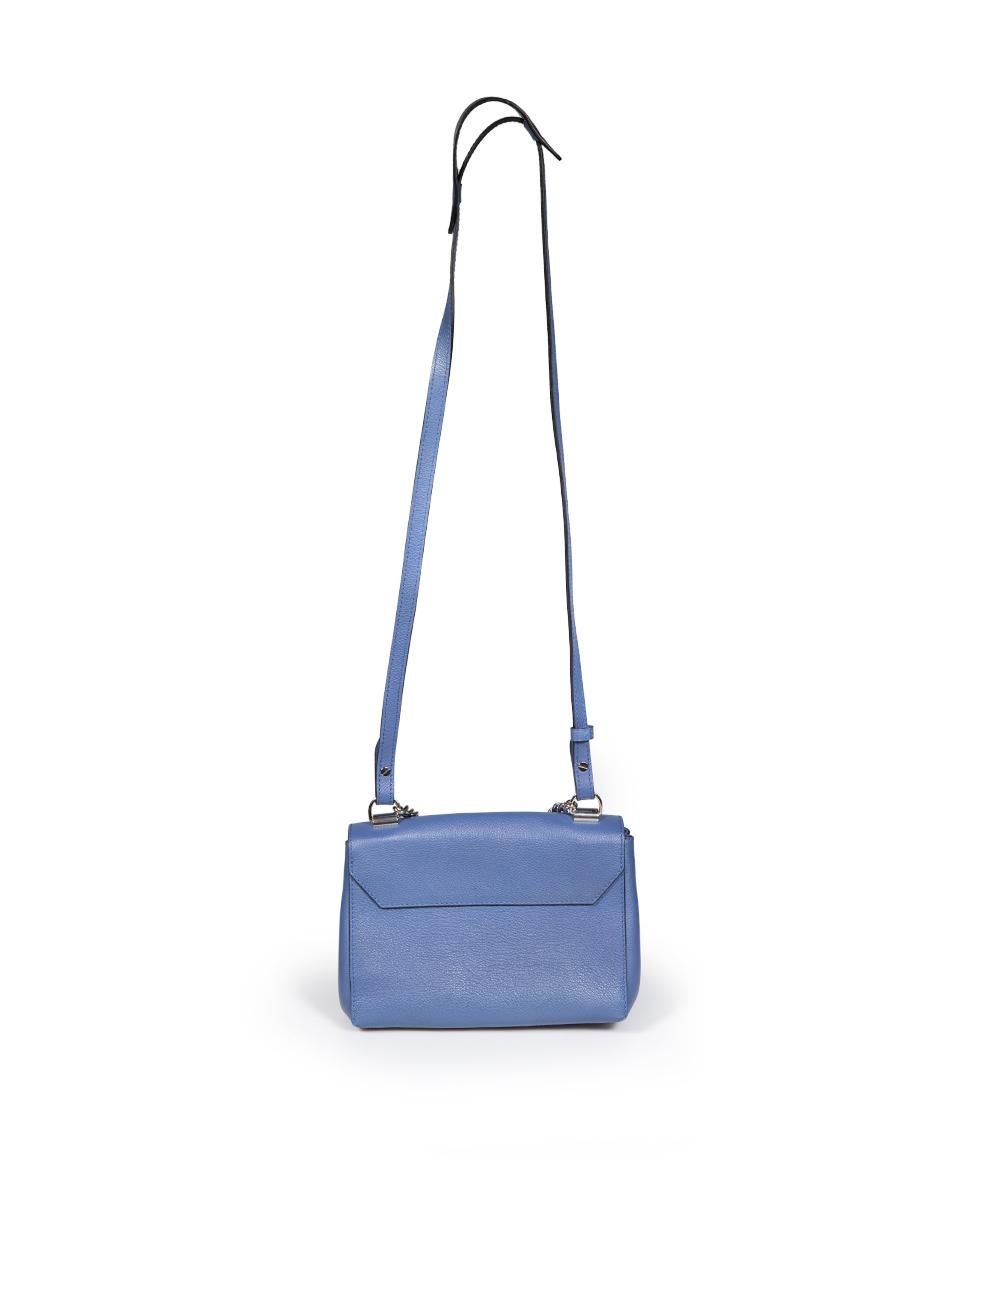 Louis Vuitton 2016 Blue Leather Lockme II BB Bag In Excellent Condition For Sale In London, GB